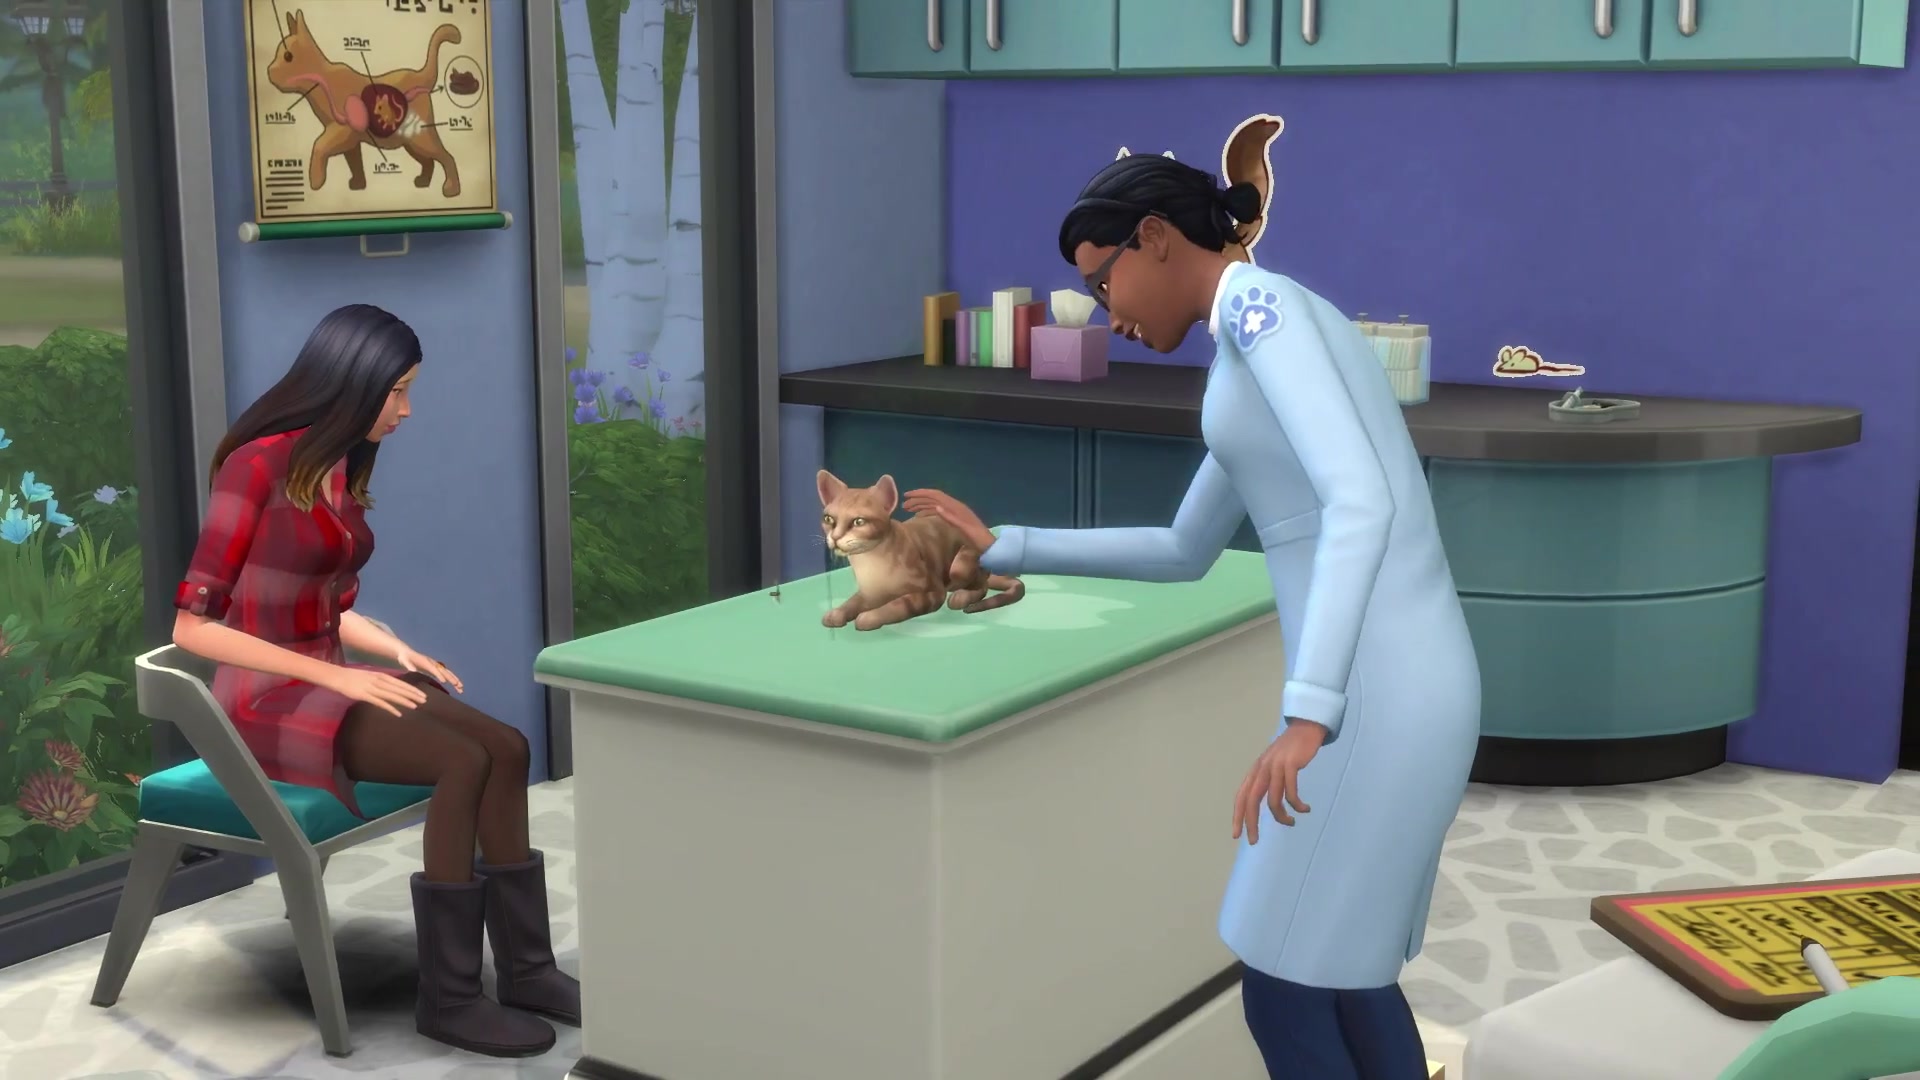 The Sims 4 Cats & Dogs_ Veterinarian Official Gameplay Trailer 0776 ...